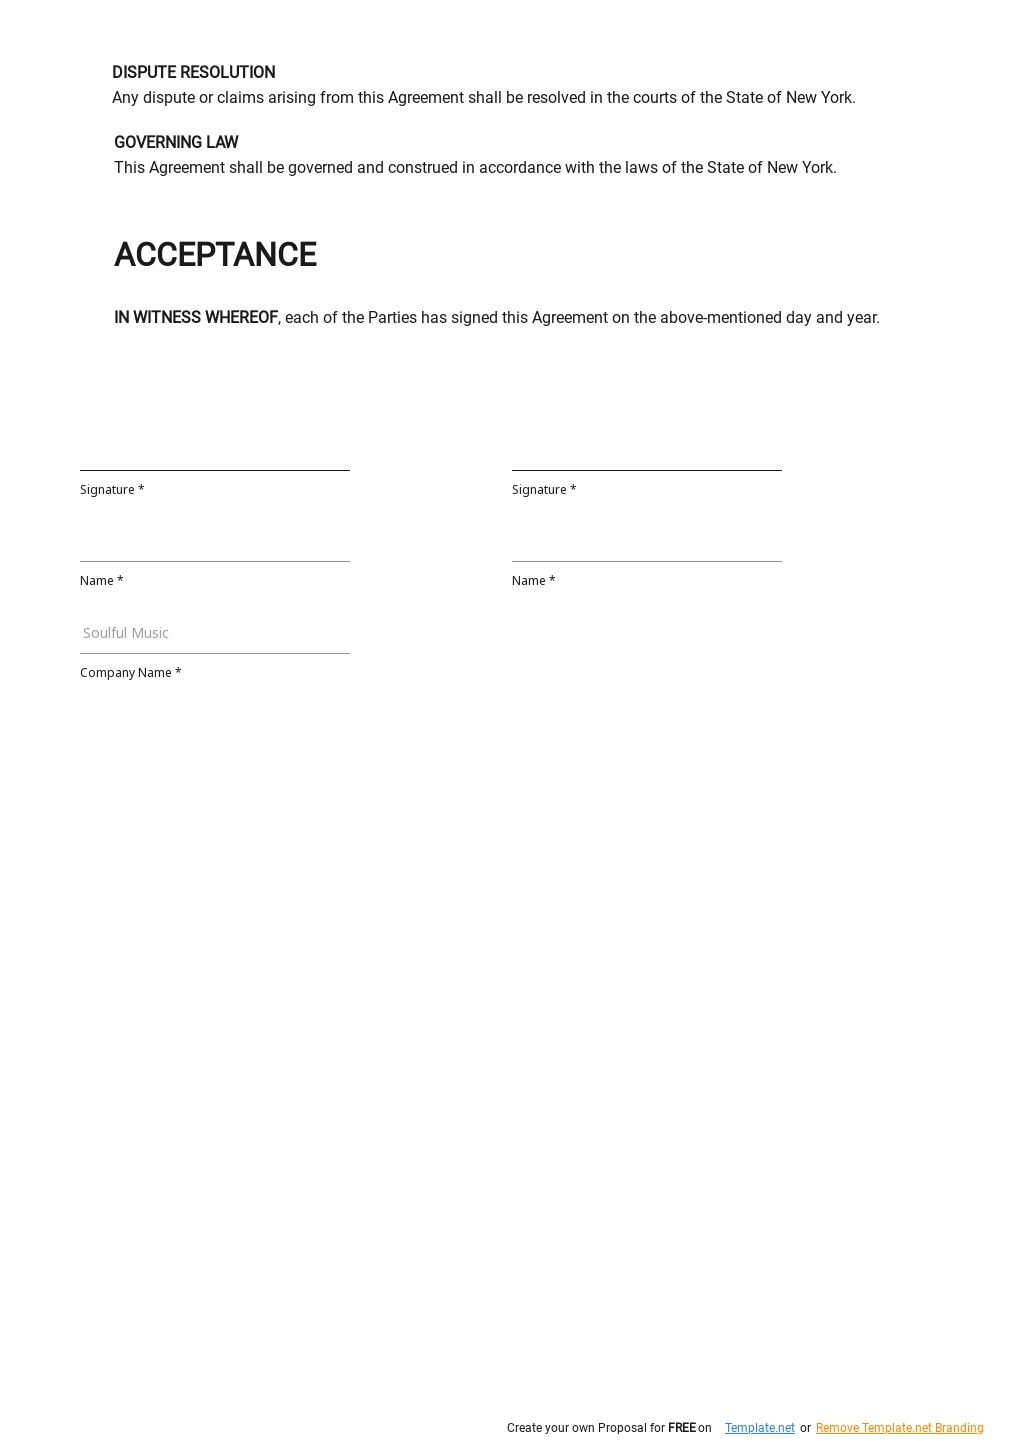 FREE Music Producer Agreement Template